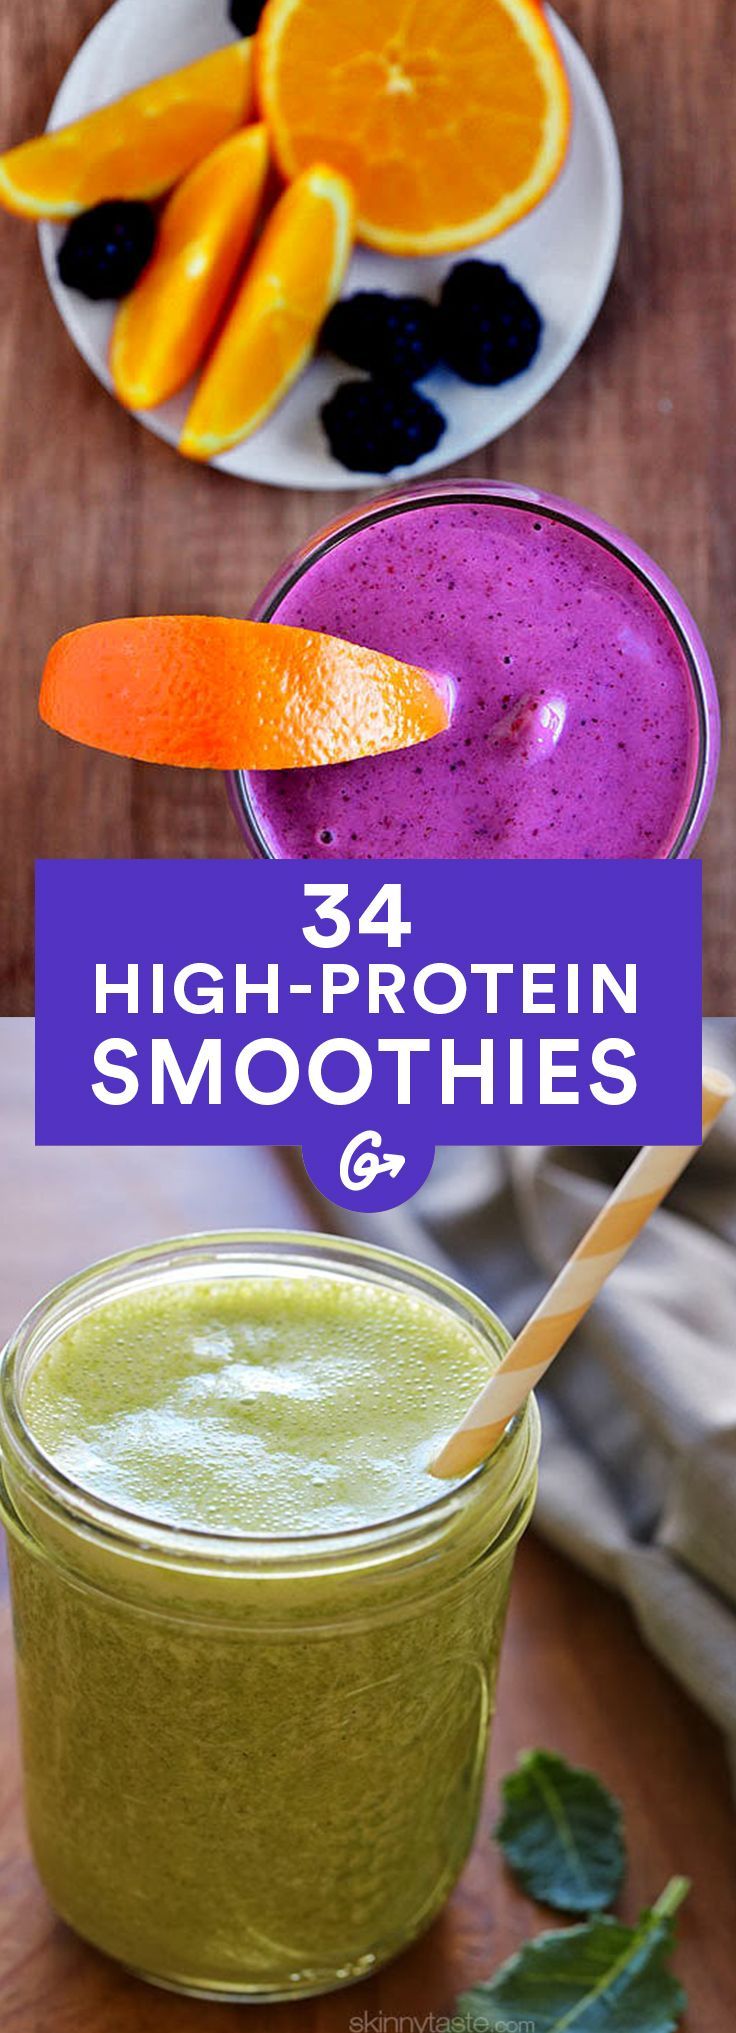 34 High-Protein Smoothie Recipes That Are Easy to Make -   7 diet Smoothie website ideas